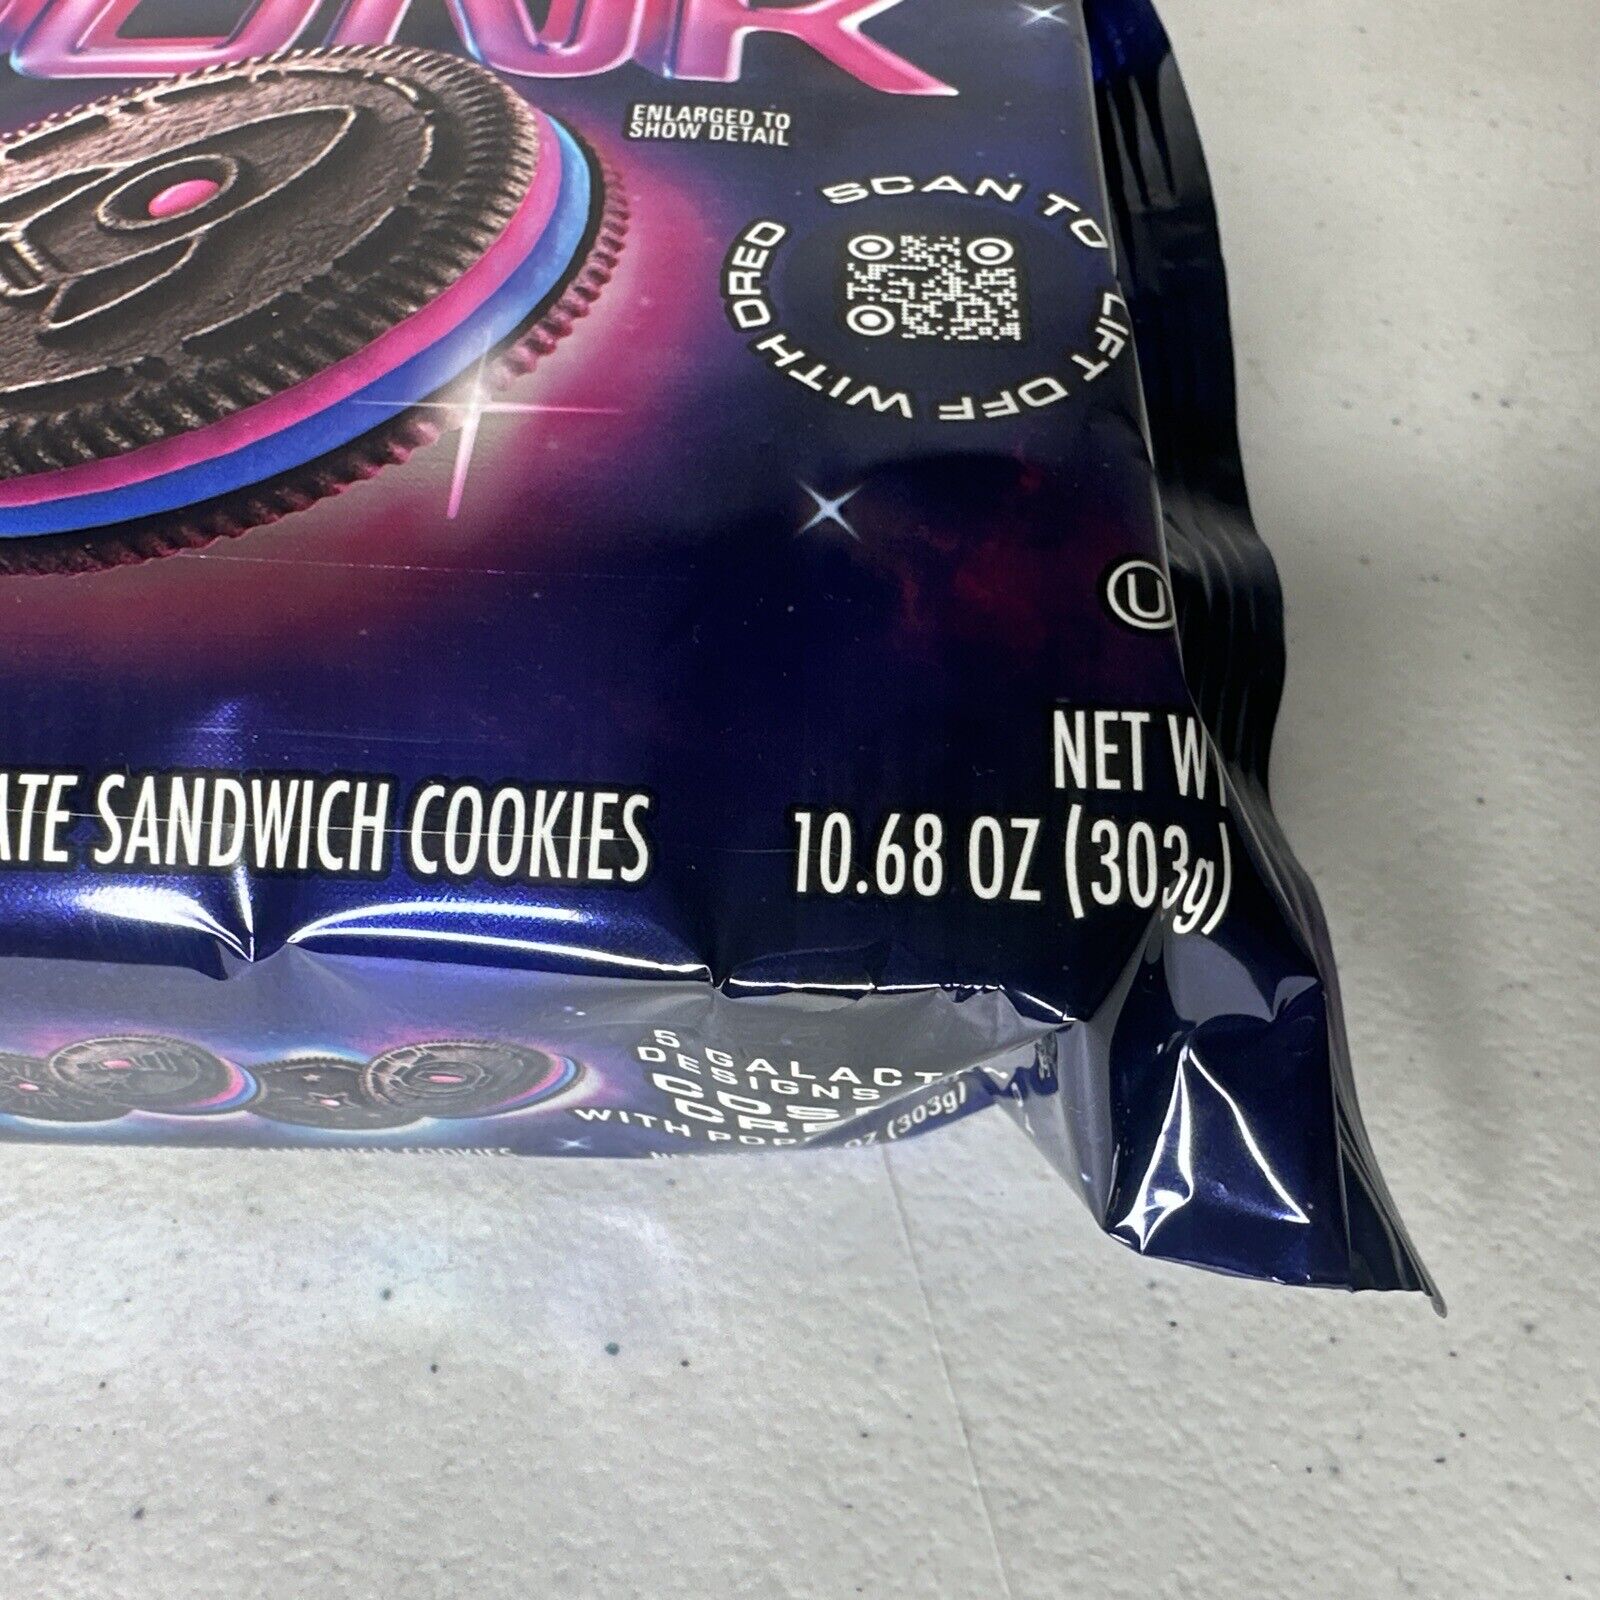 Limited Edition OREO Space Dunk Chocolate Cookies with Popping Candy Cosmic Crème - 10.68oz - TreasuTiques